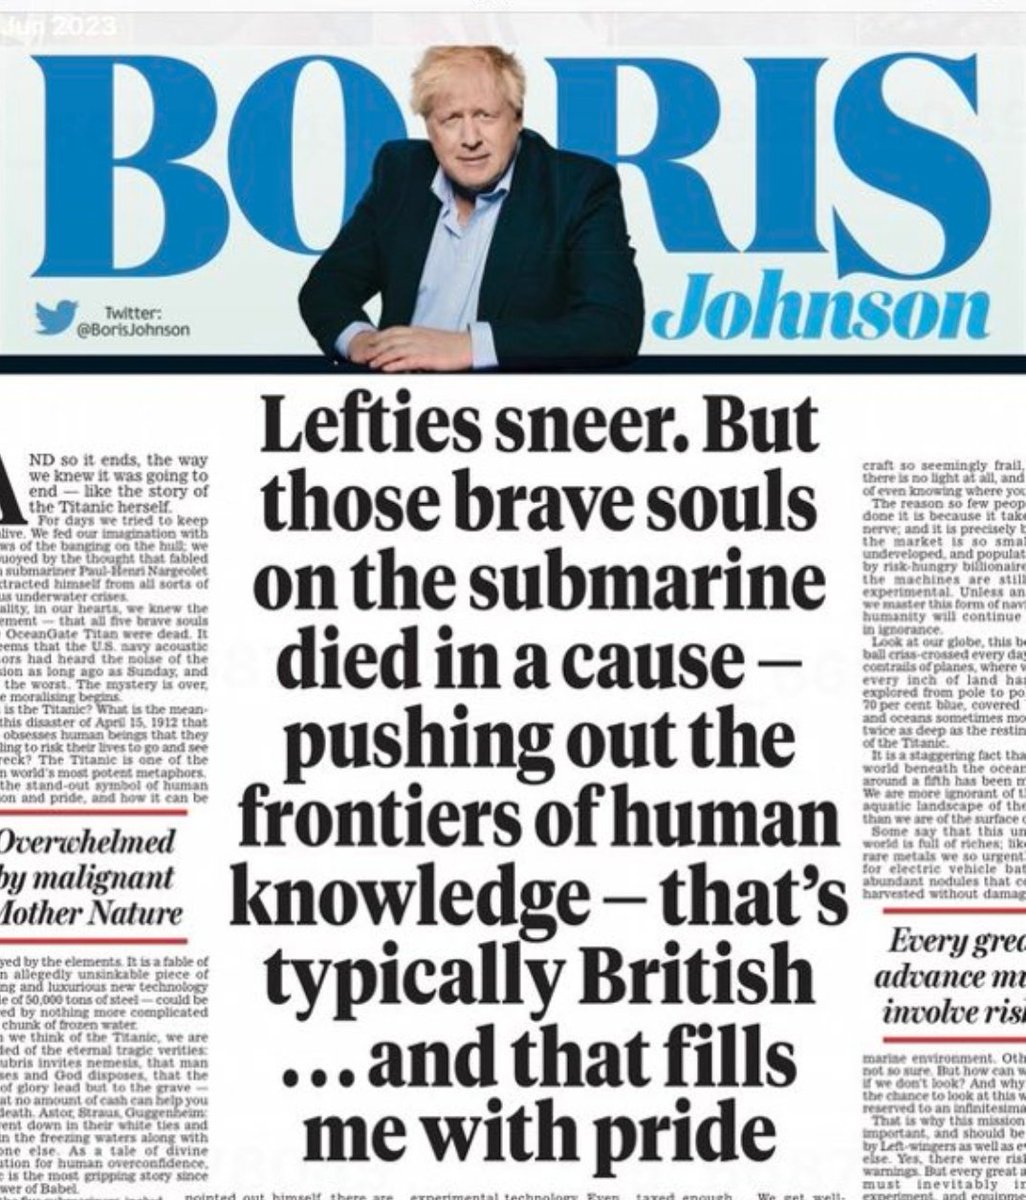 Died for a cause?
What about the 1000 NHS staff who died because Boris Johnson gave PPE contracts to mates who produced zero or substandard PPE?
What about the 25,000 who were sent to their deaths in care homes because he lied?
The only thing Boris cares about: HIMSELF.